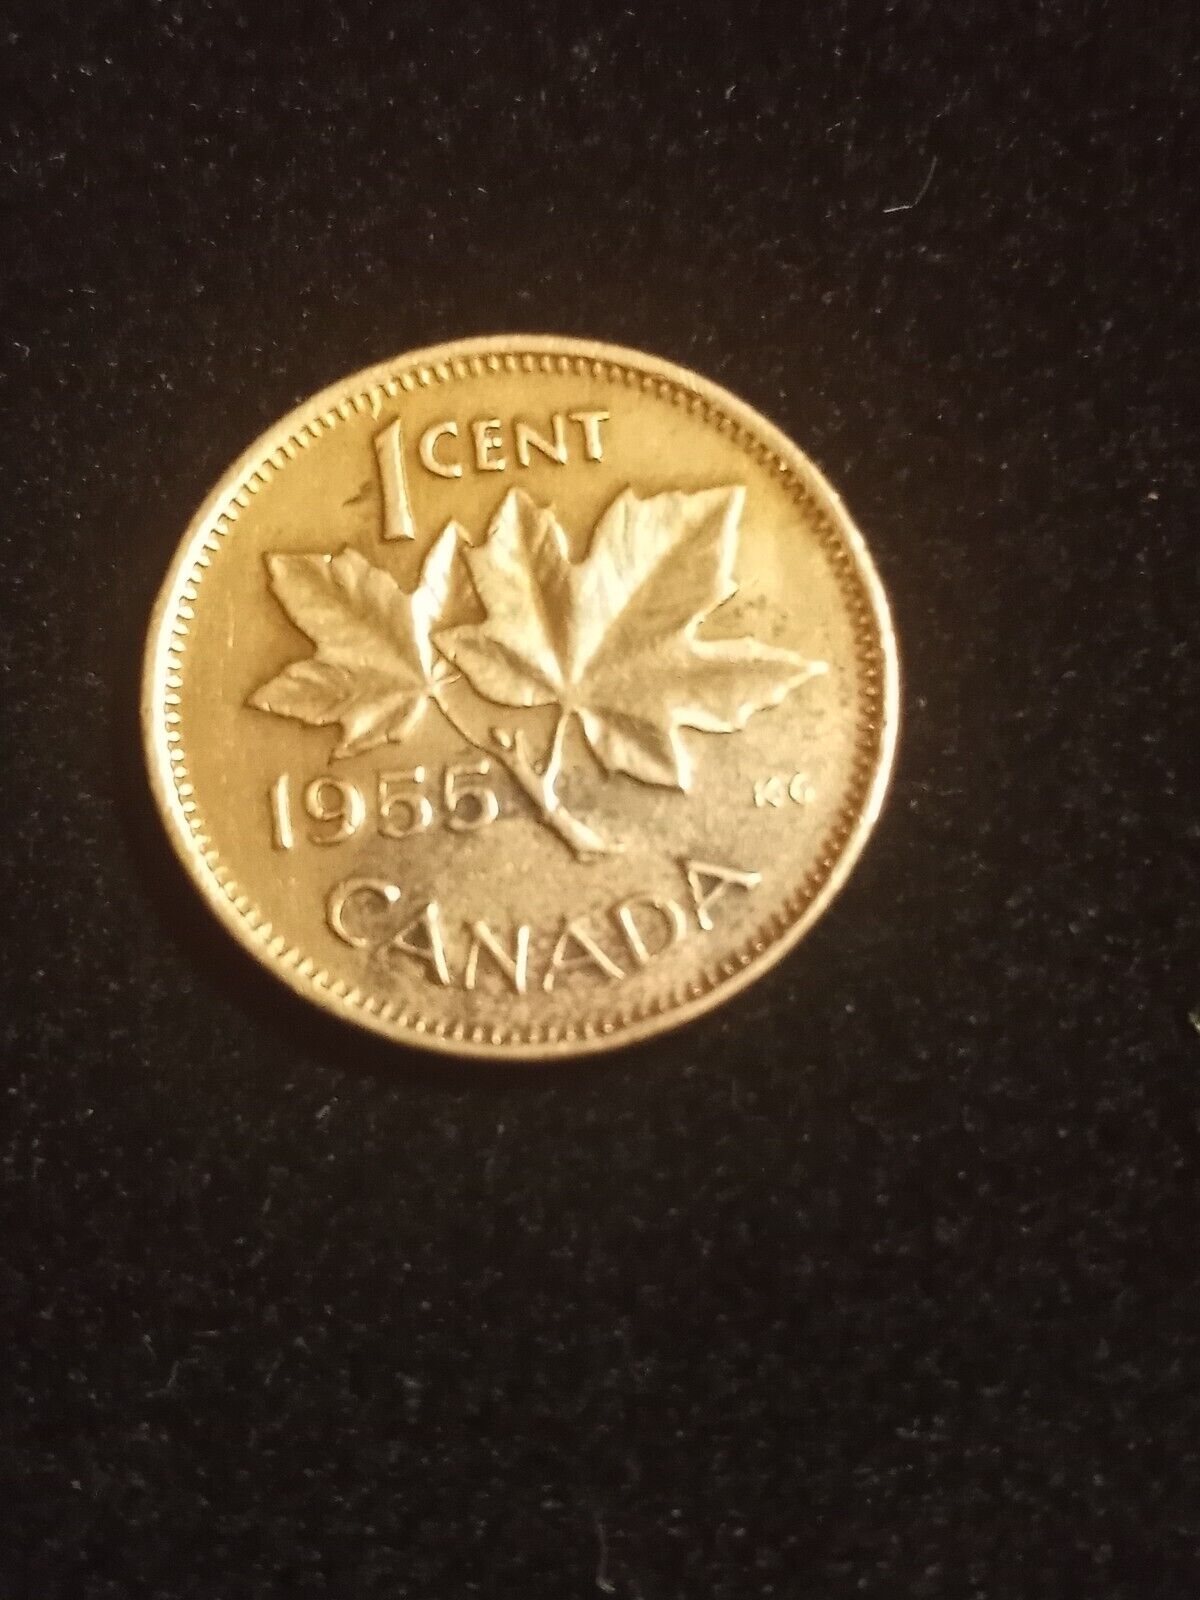 1955 Extremely Rare Canada Small Cent NO Shoulder Fold ,Strapless